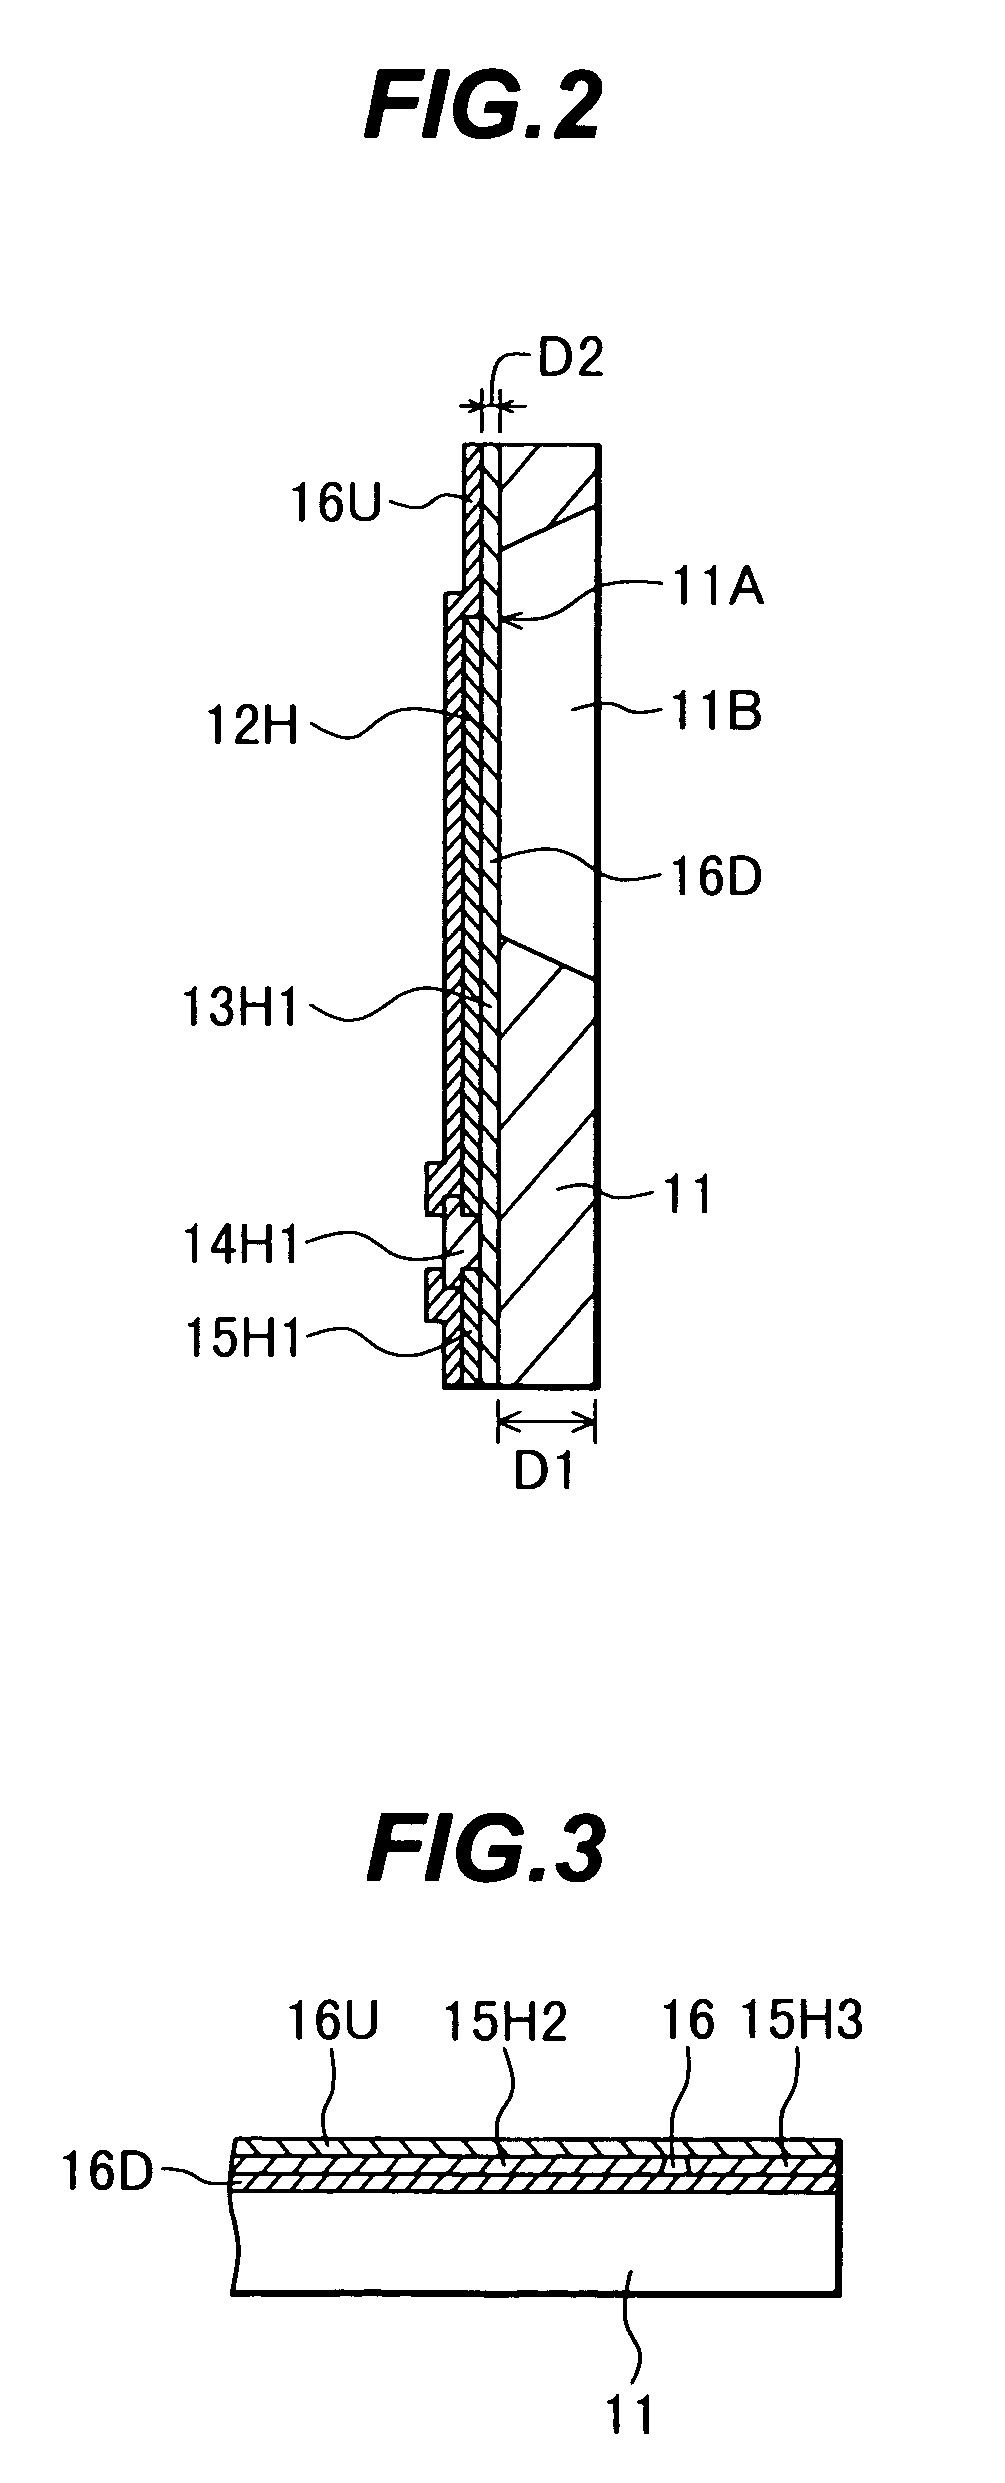 Physical quantity detecting device having second lead conductors connected to the electrodes and extending to the circumference of the substrate